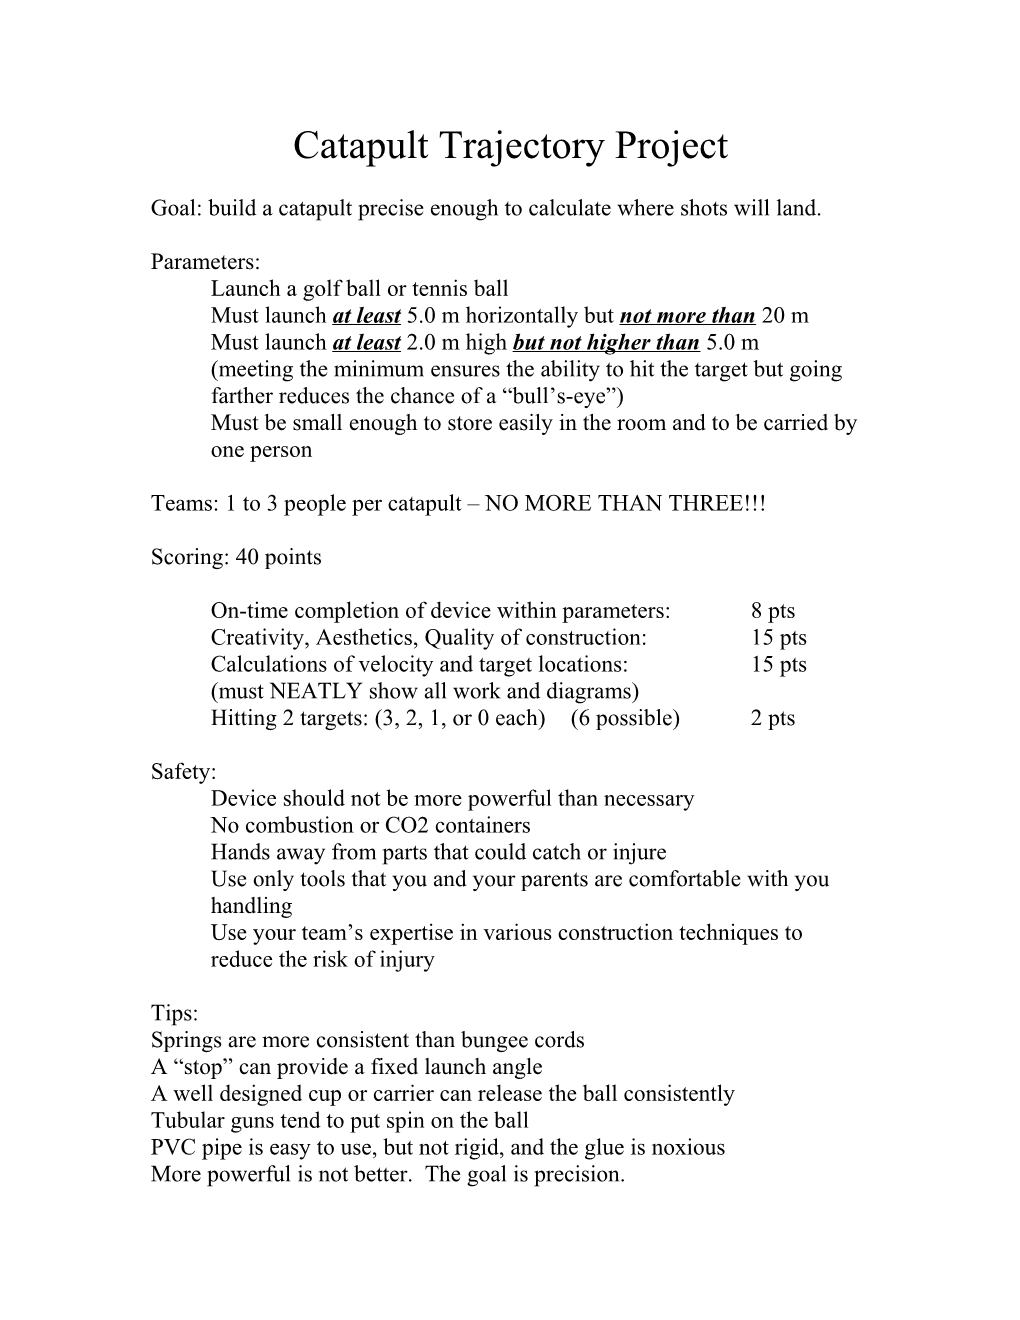 Catapult Trajectory Project